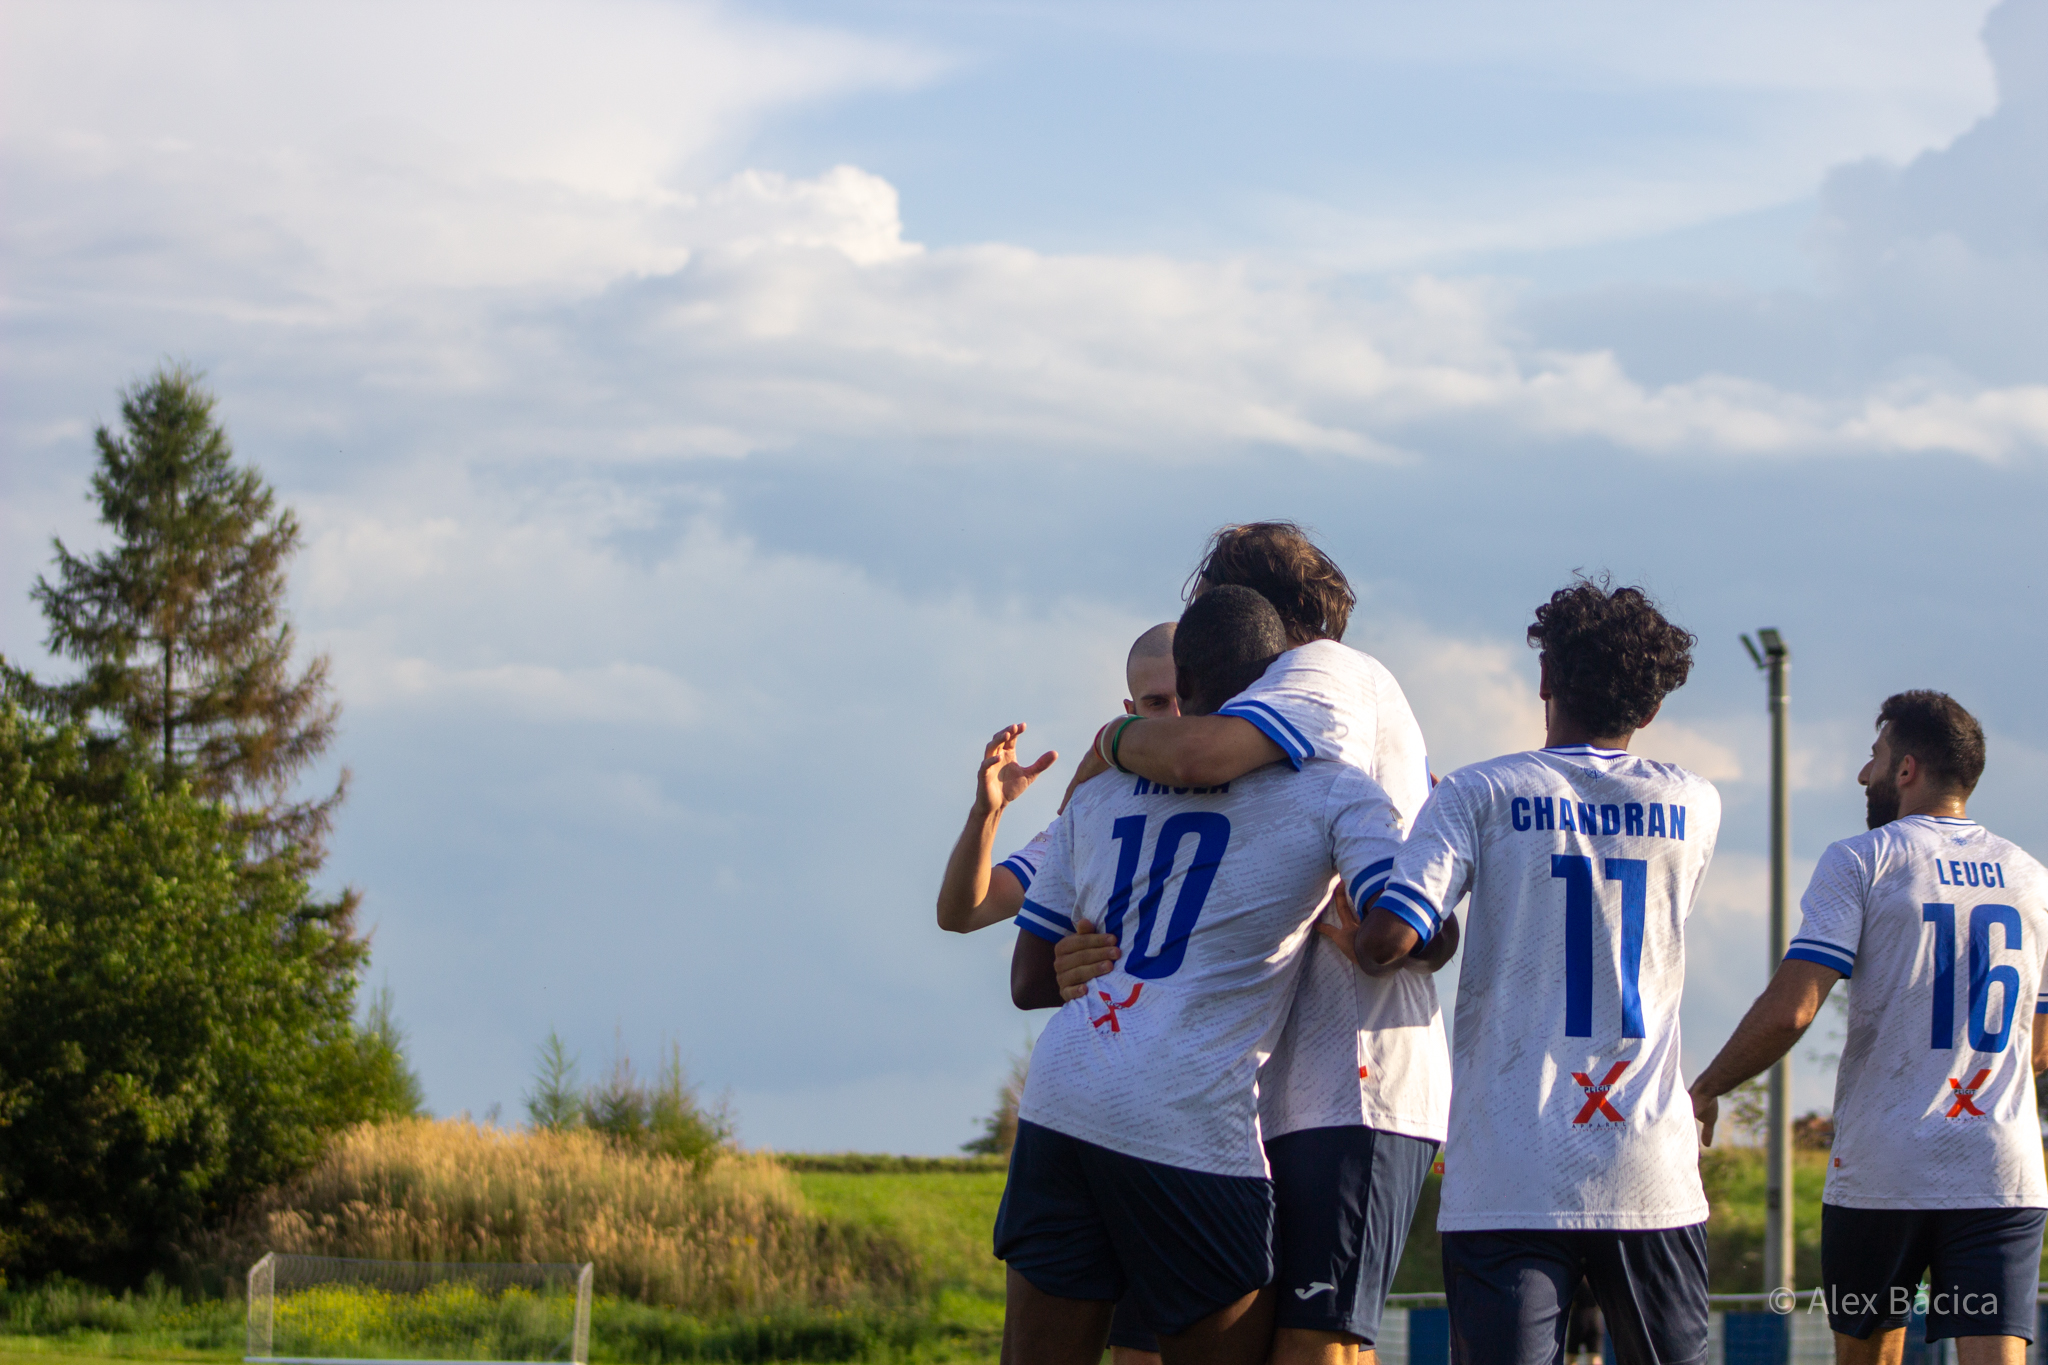 Players of Krakow Dragoons FC celebrating a goal with a nice view of a corn field and a dramatic sky in the background